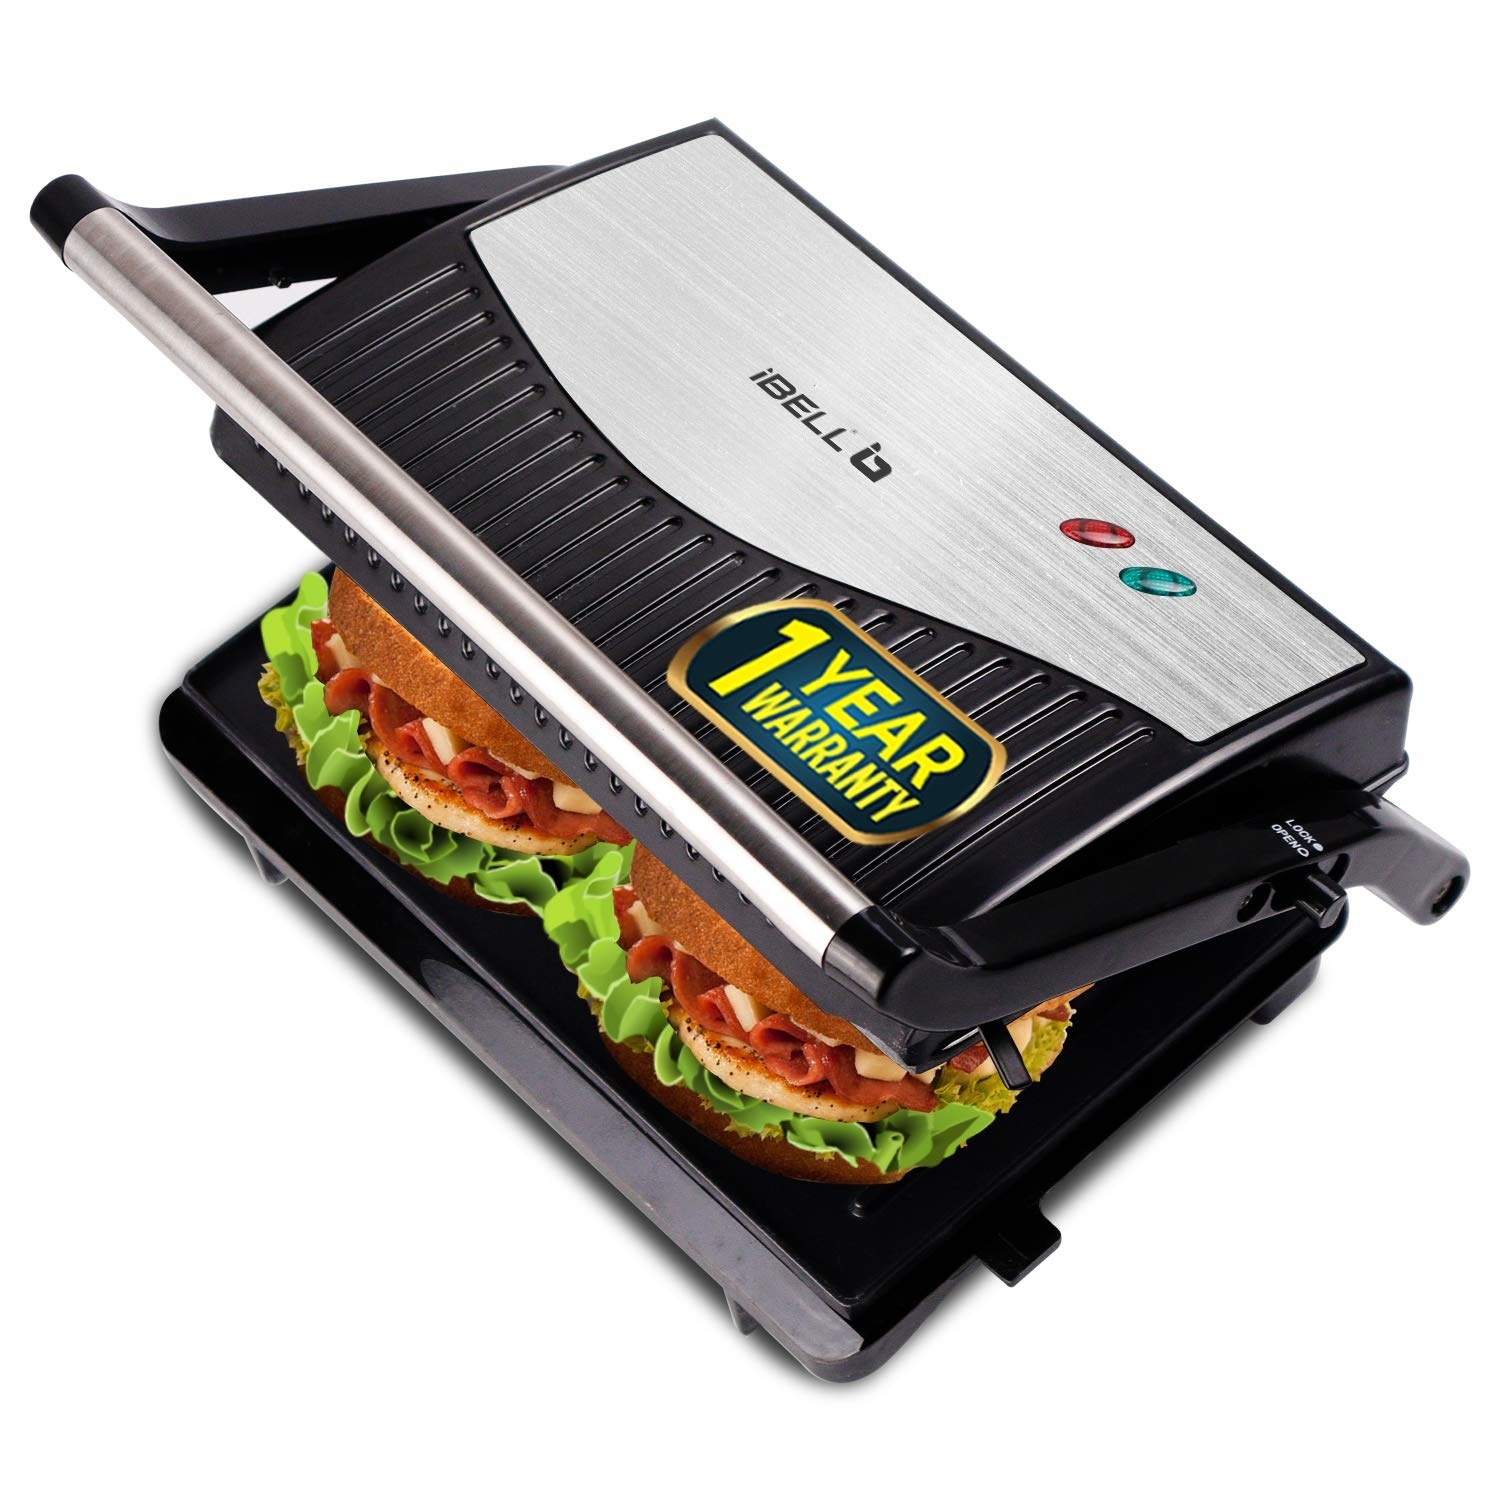 The panini grill with sandwiches in it.